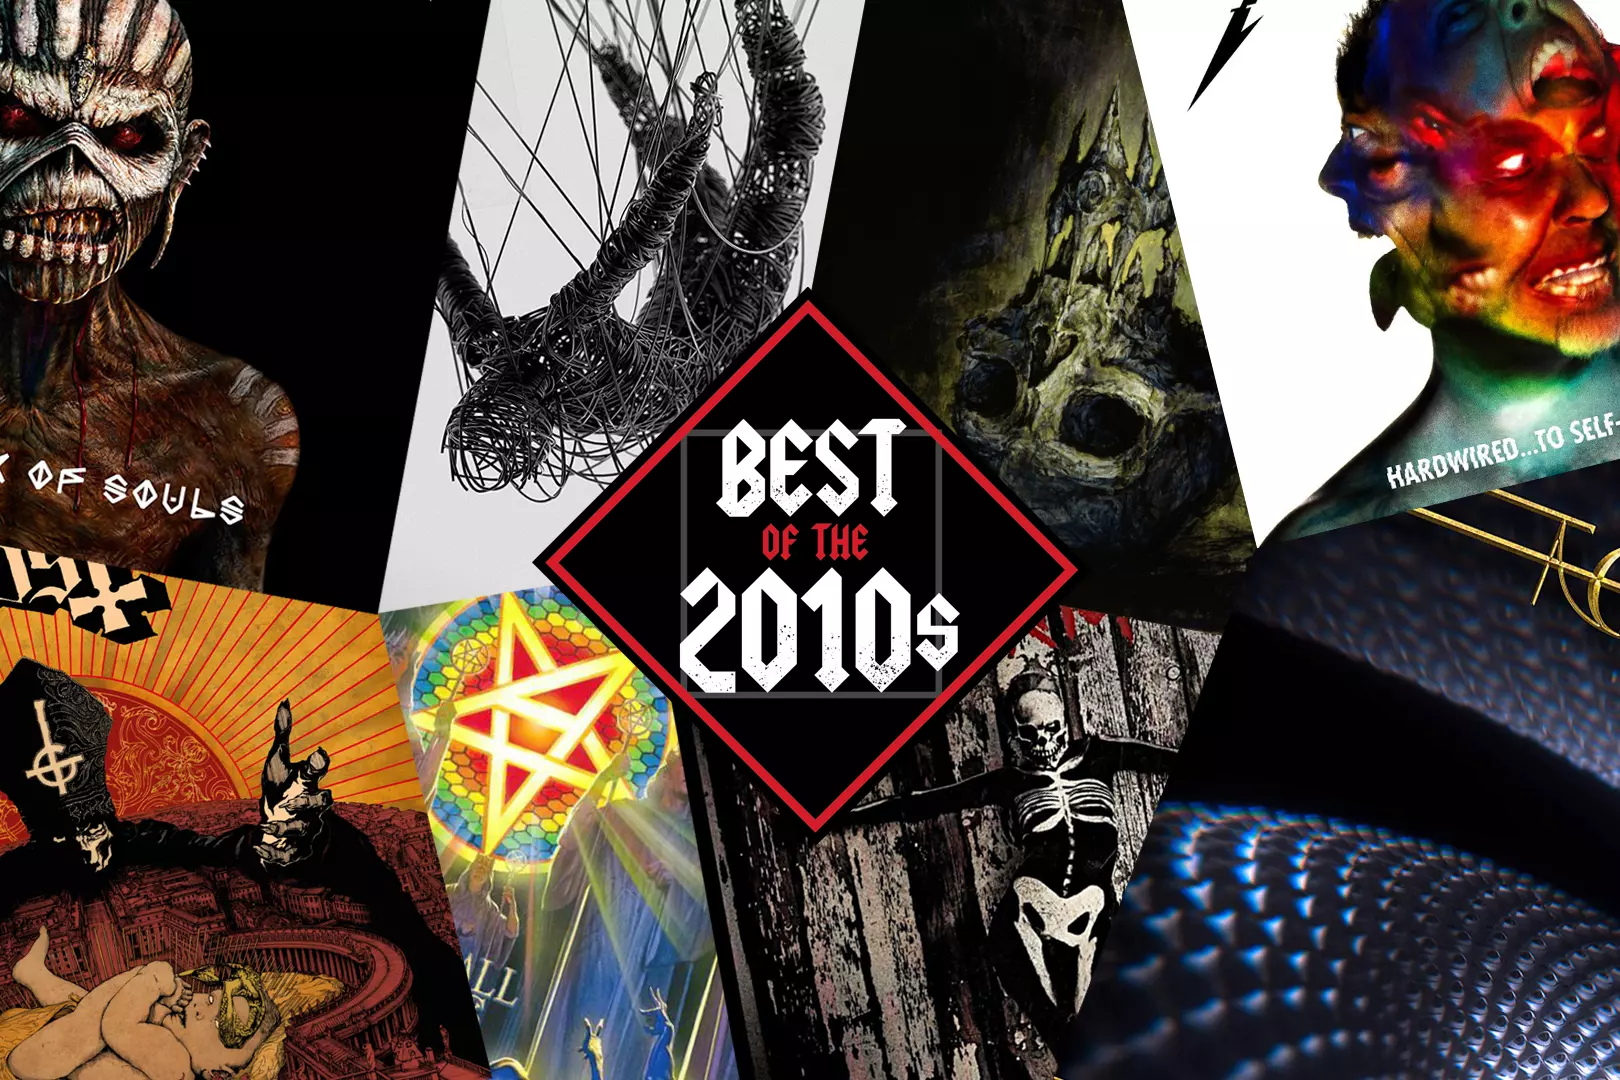 The 66 Best Rock Albums of the Decade